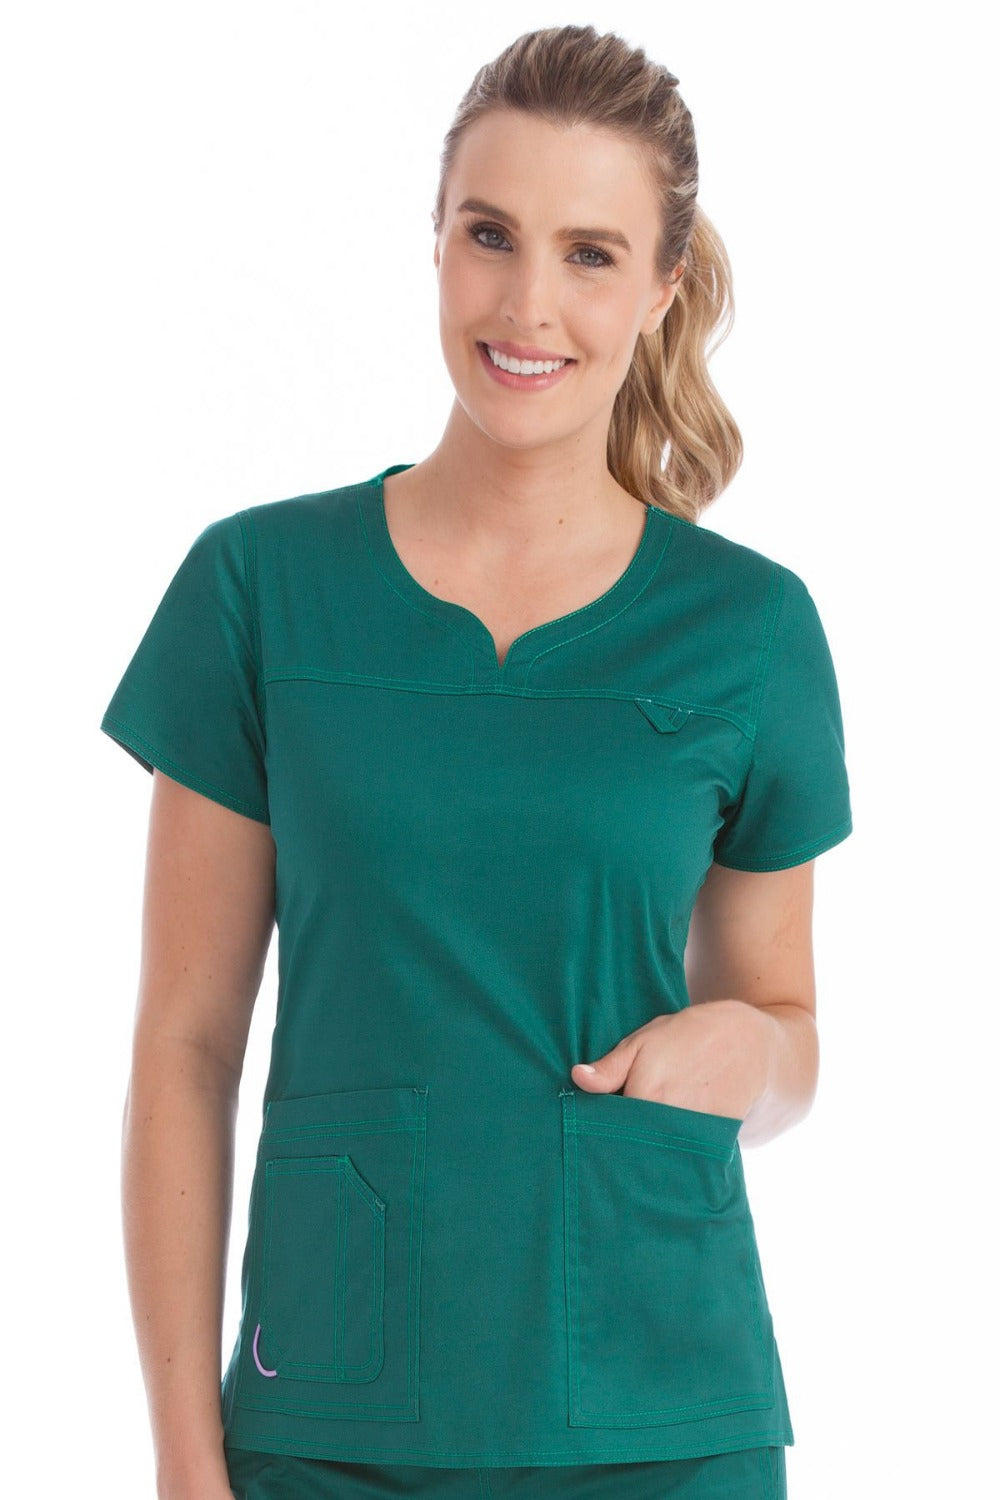 Med Couture Scrub Top MC2 Lexi in Hunter at Parker's Clothing and Shoes